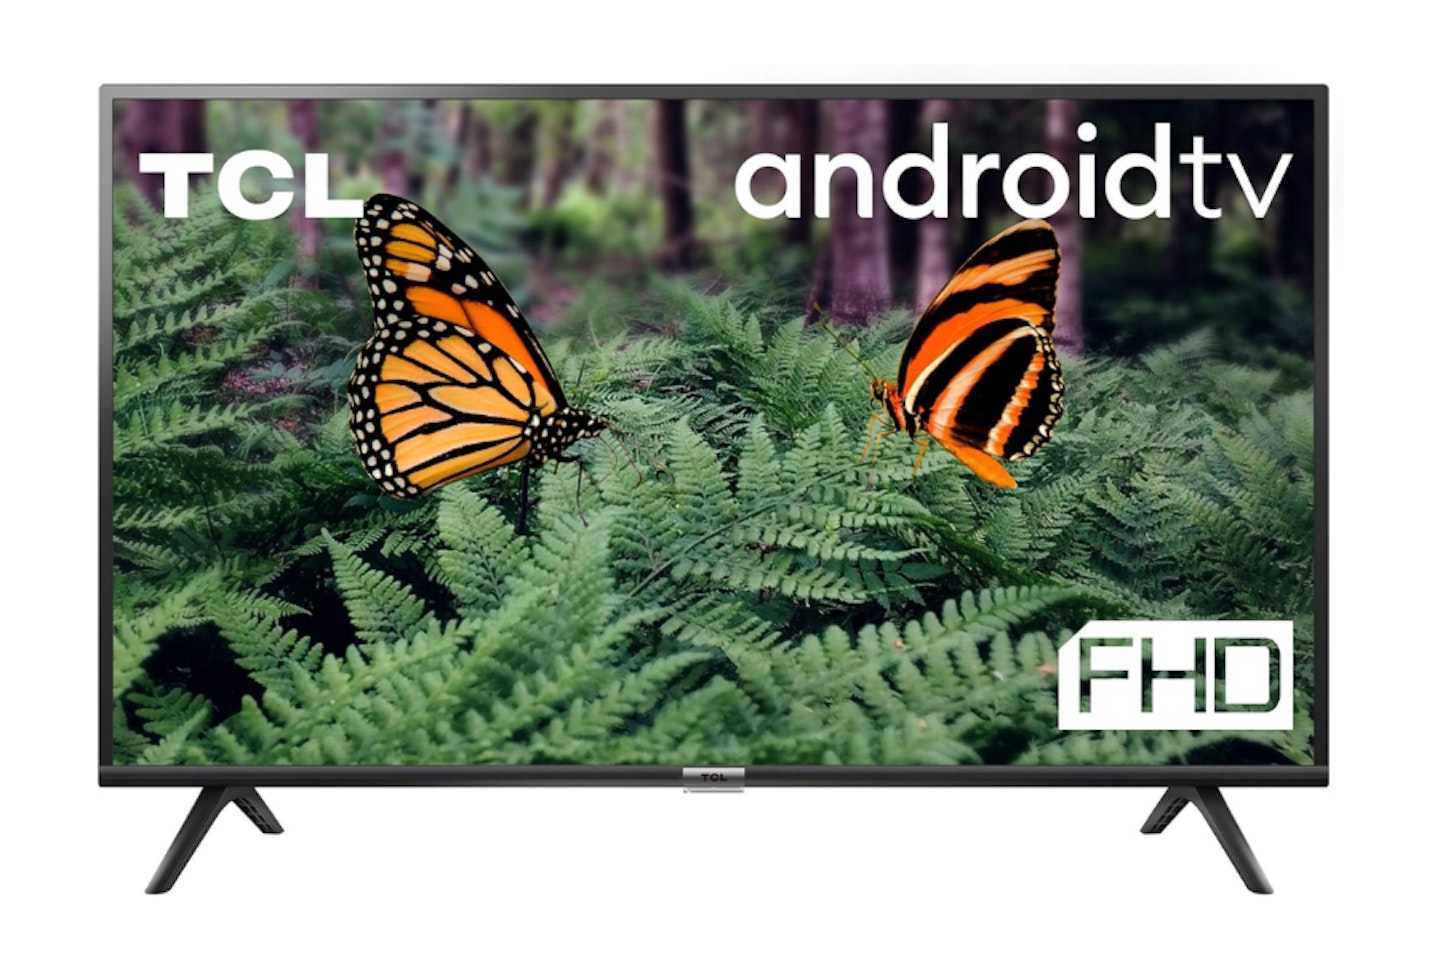 TCL 40ES568 40-Inch LED Smart Android TV - one of the best 40" tvs